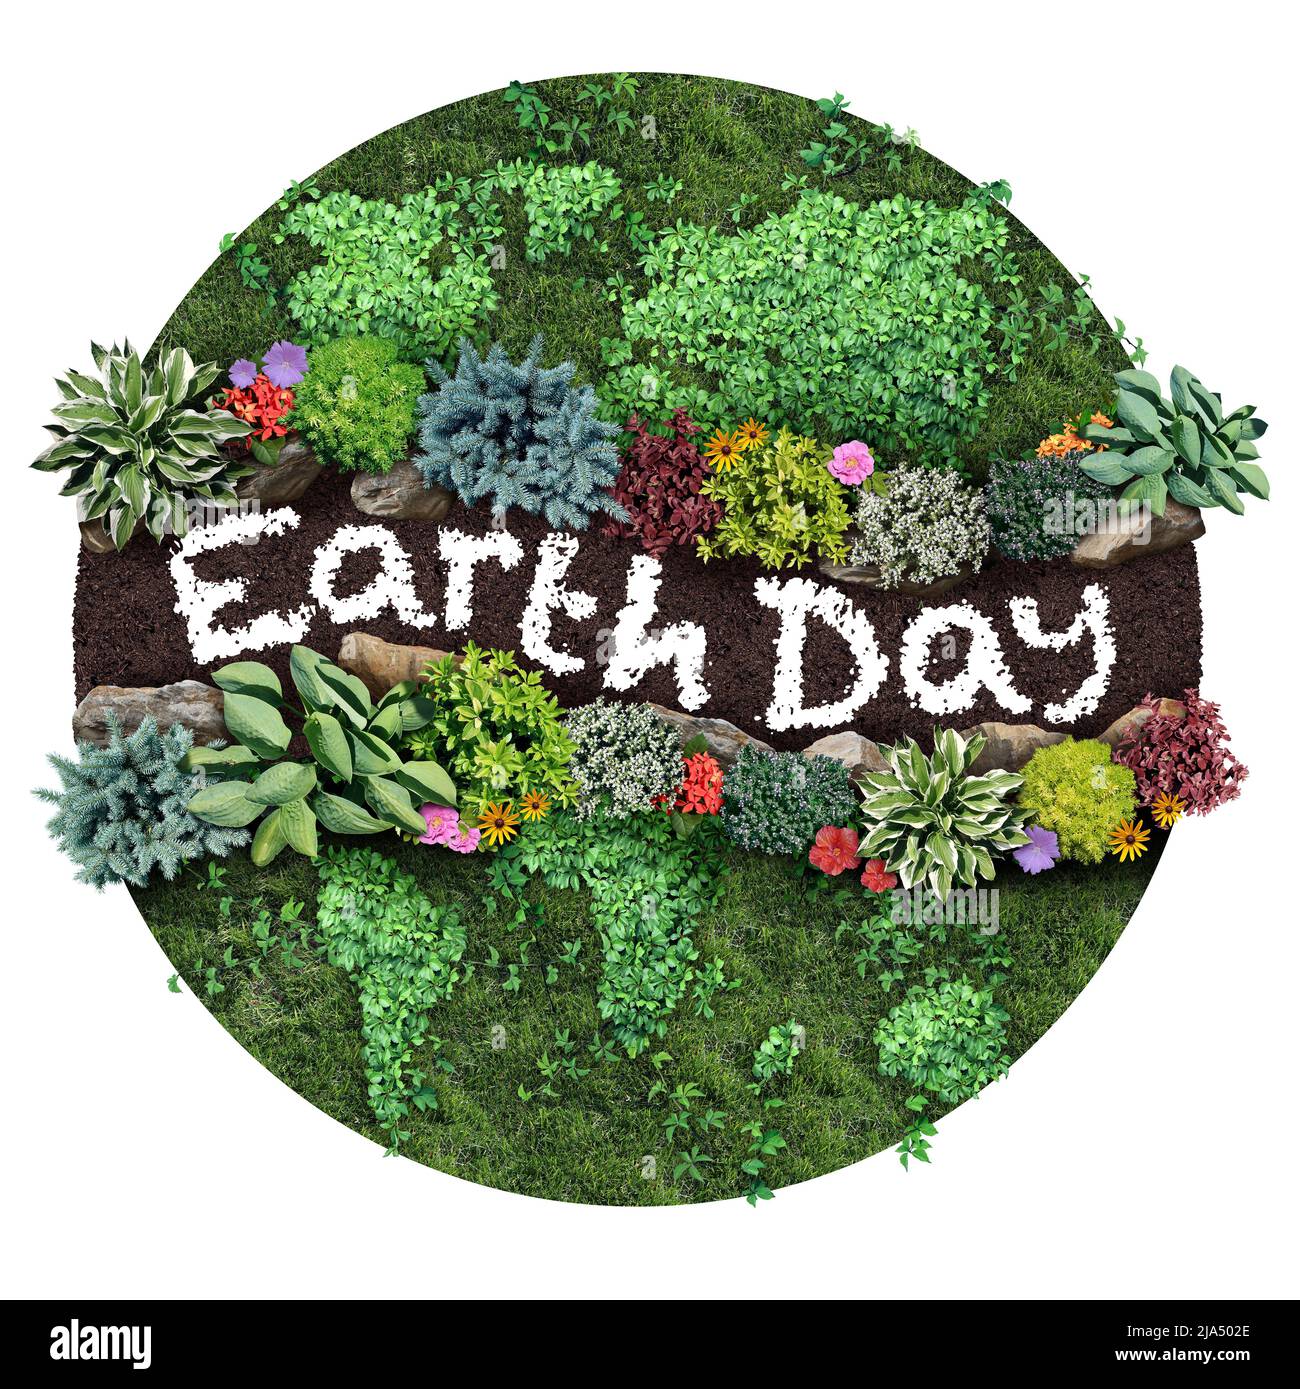 World Earth day symbol celebration as an international climate change concept or eco friendly habitat protection as plants shaped as the planet. Stock Photo